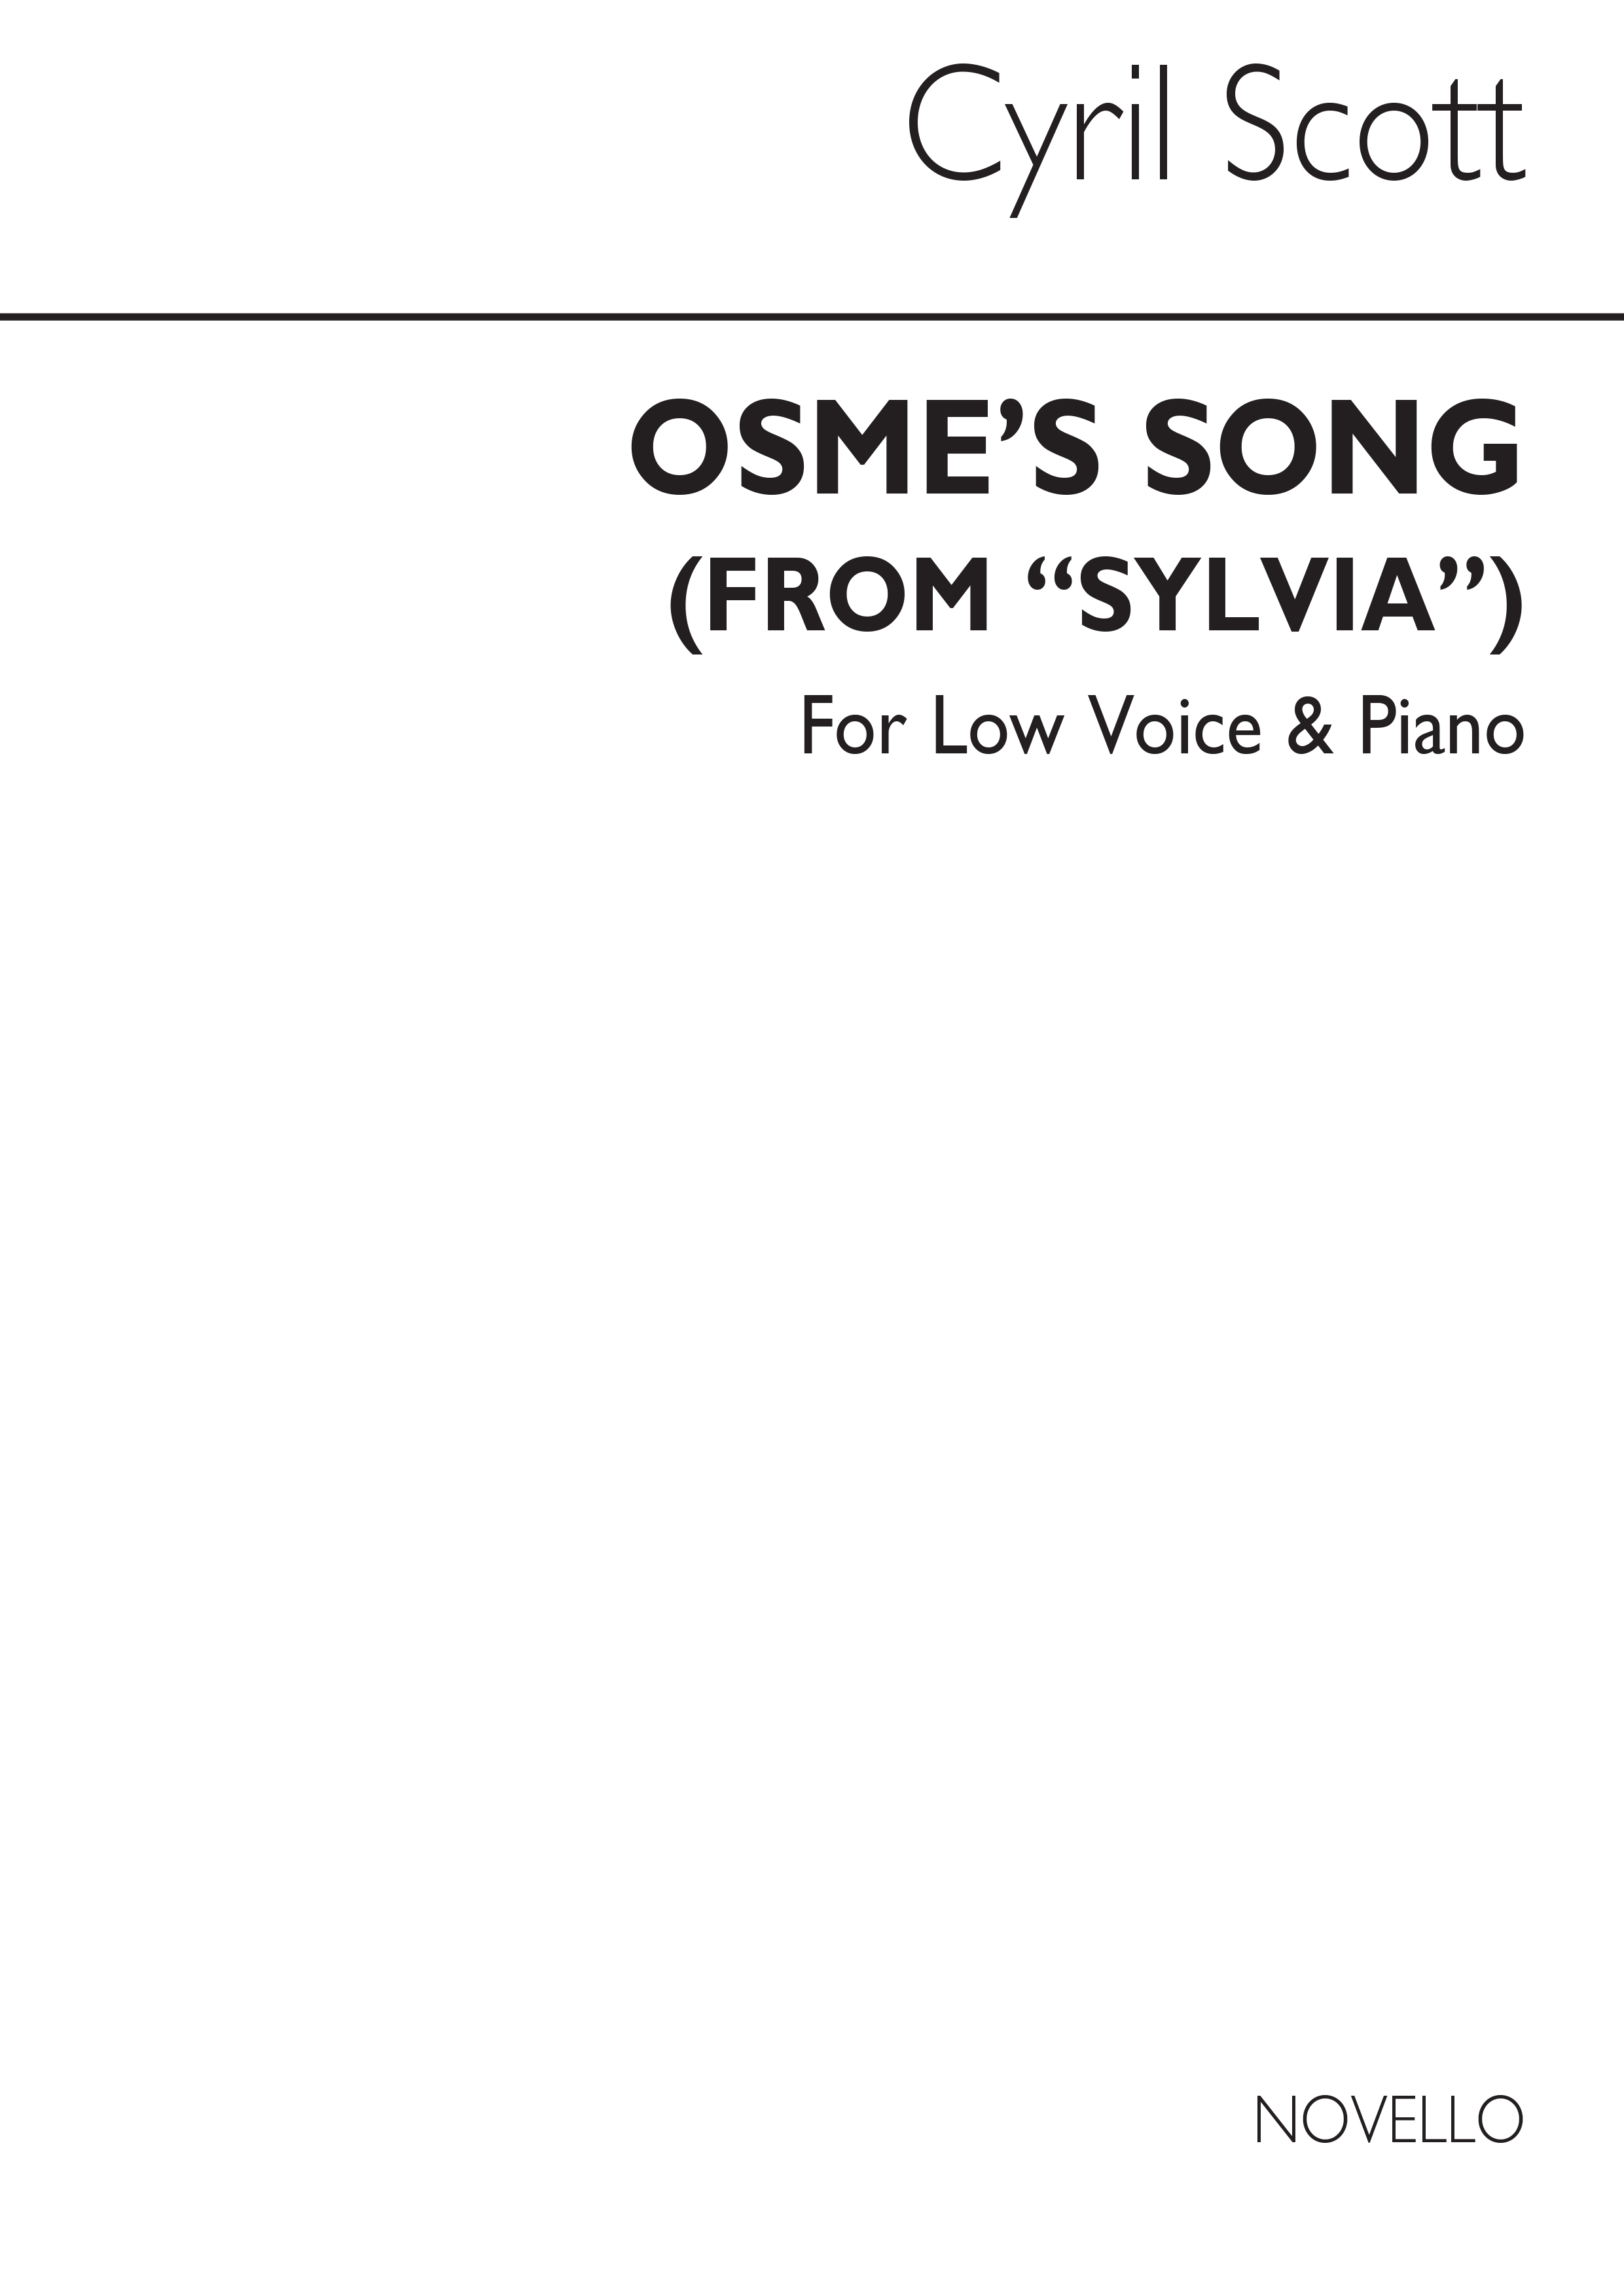 Cyril Scott: Osme's Song (From Sylvia) Op68 No.2: Low Voice: Vocal Work